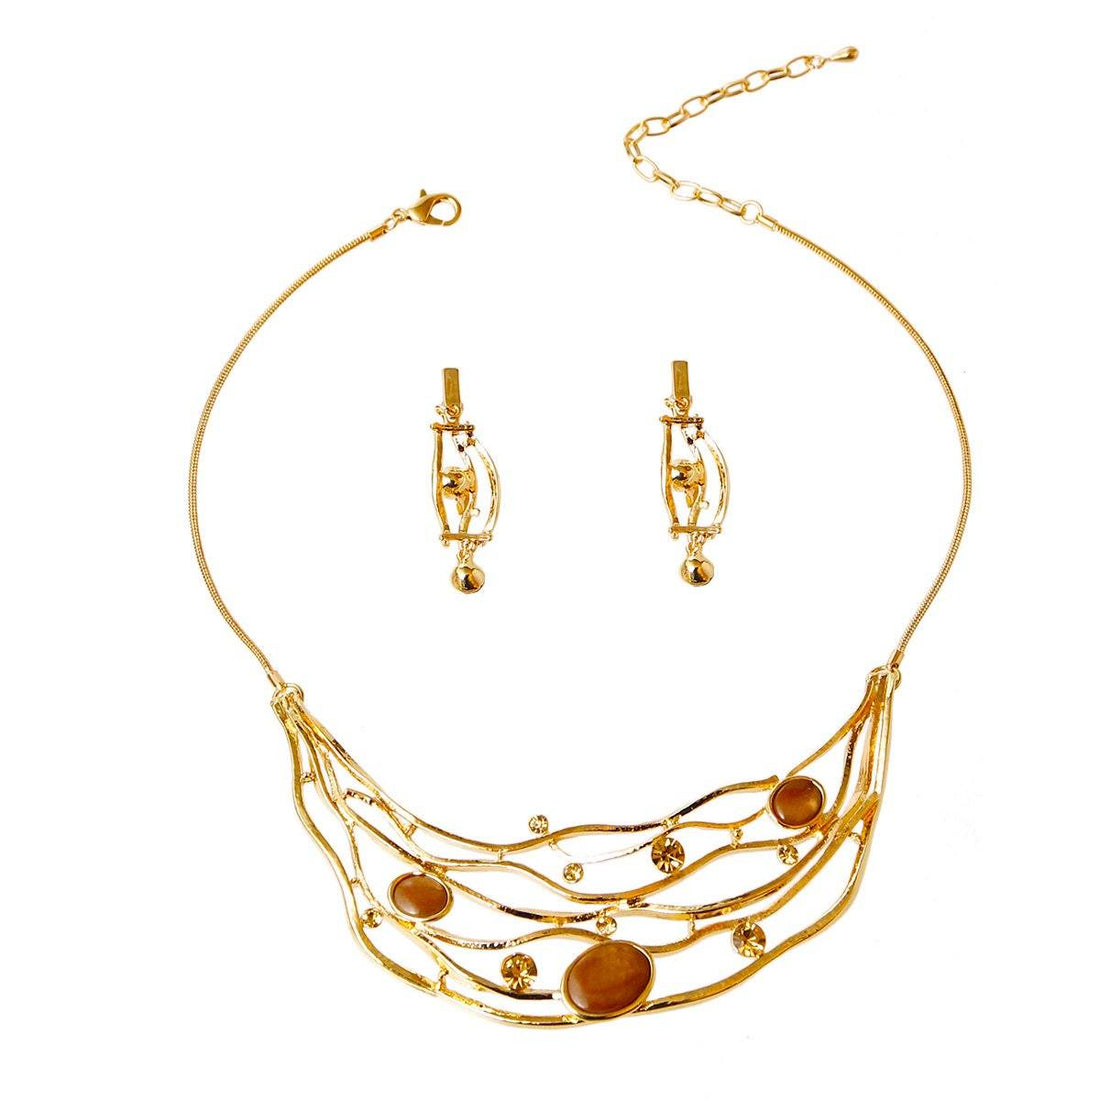 Gold Bib Necklace Set Featuring Brown Crystal and Topaz Rhinestone Detail